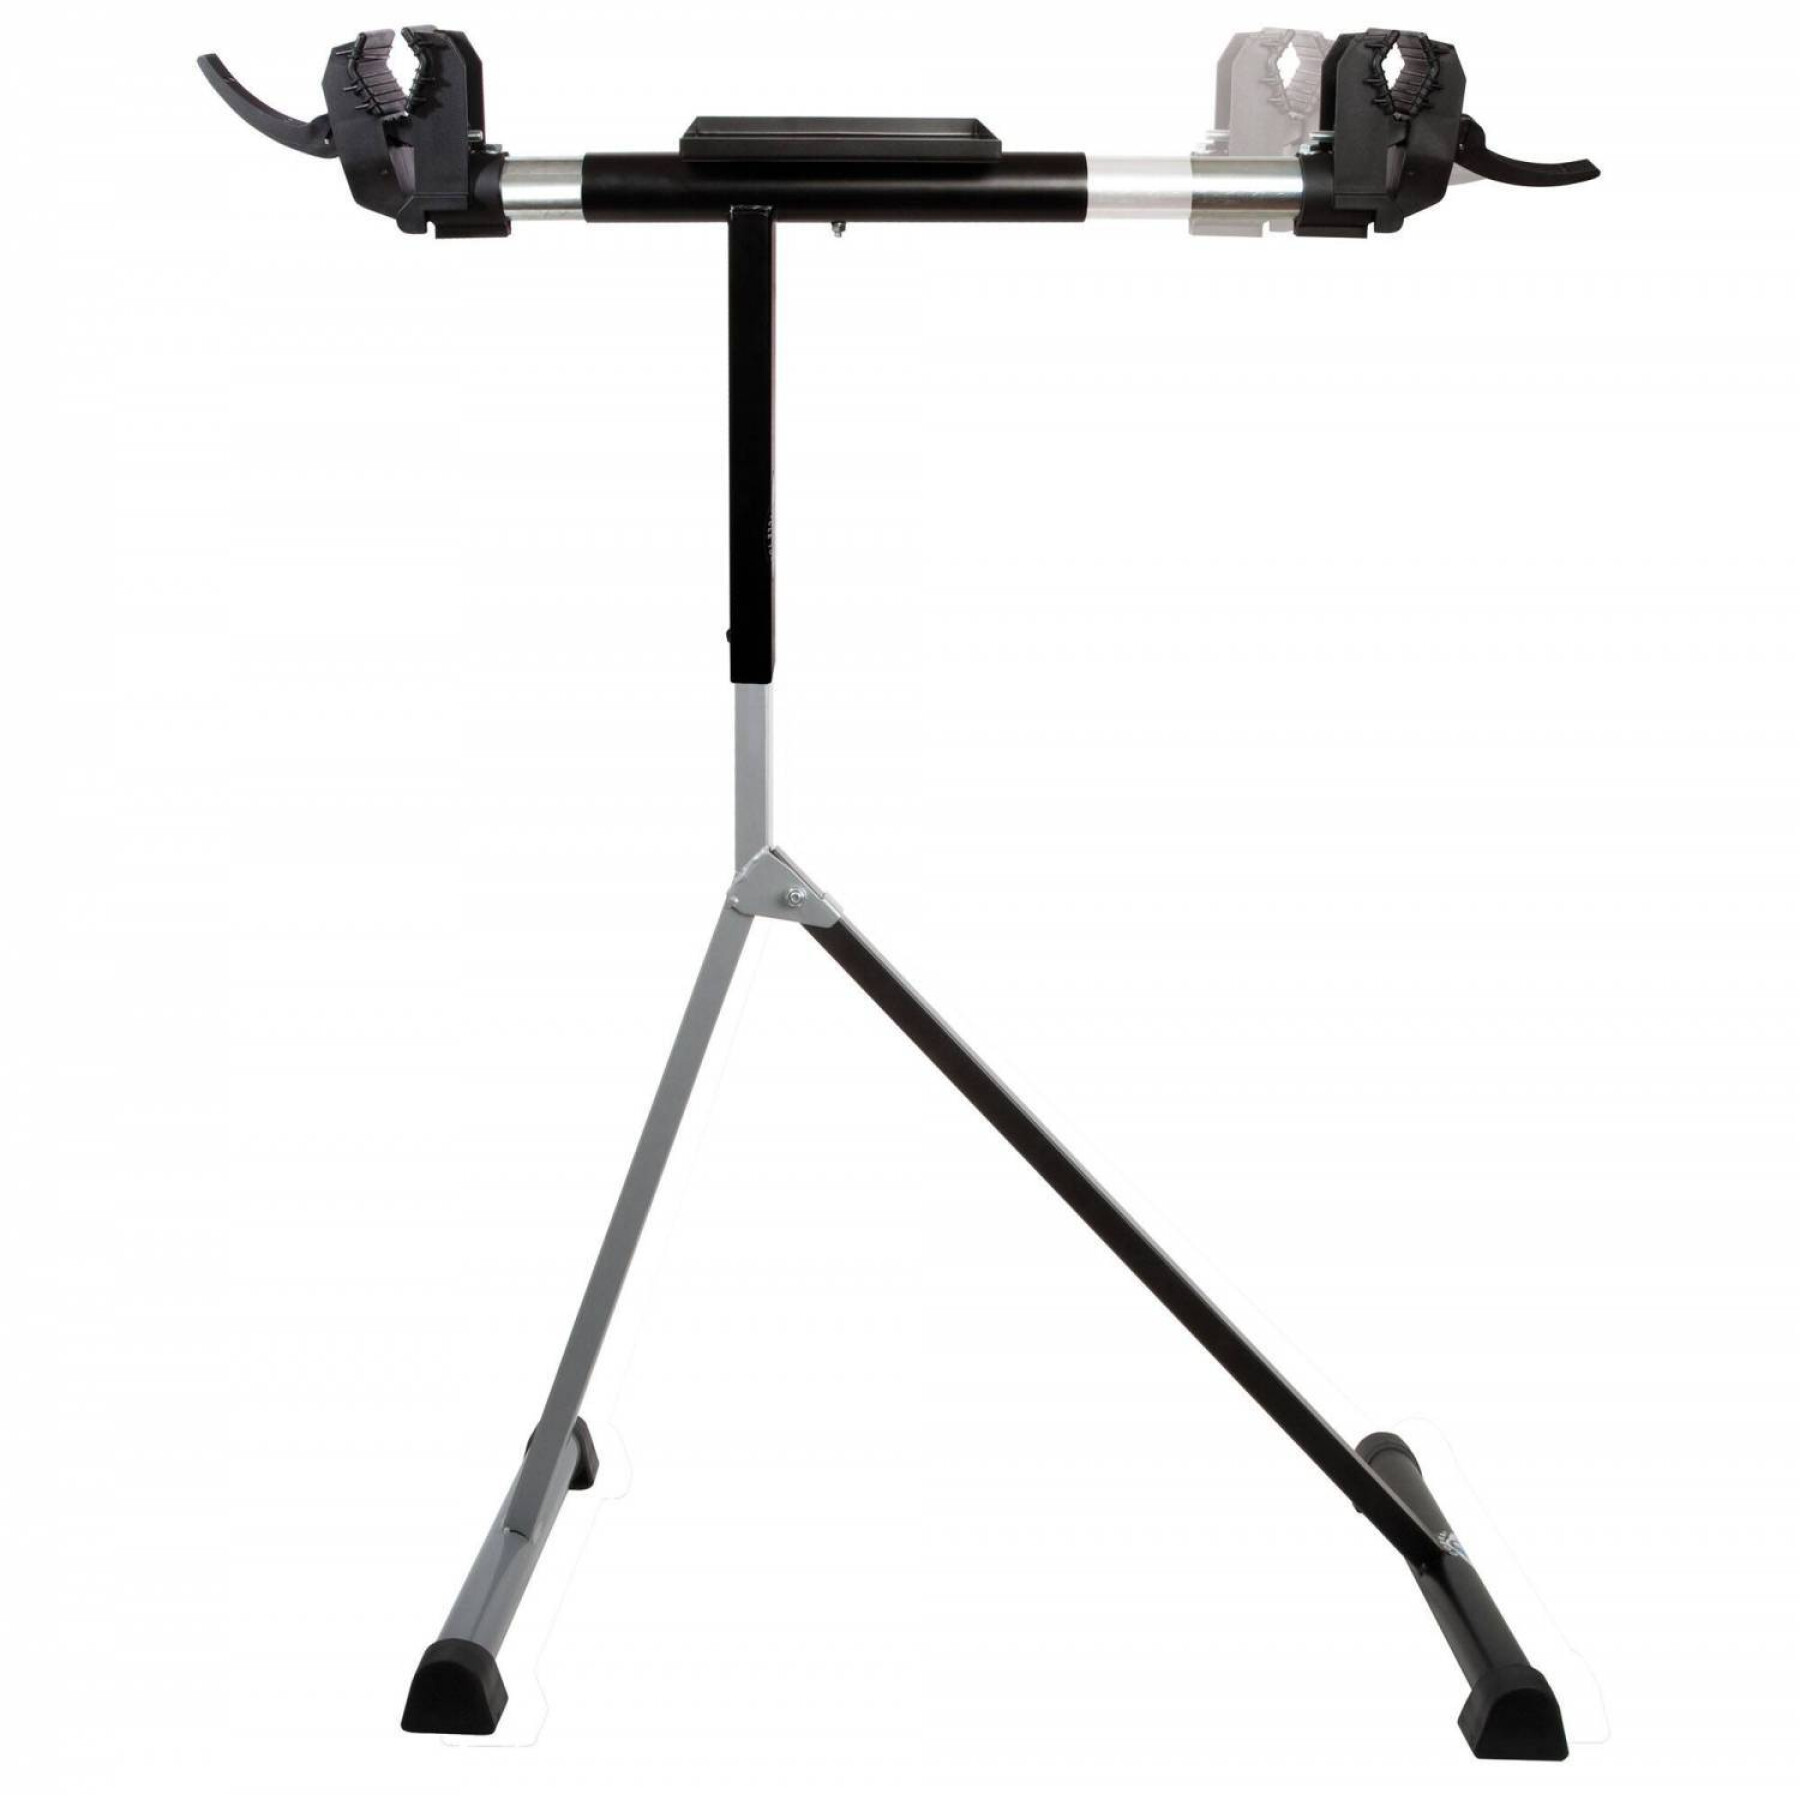 Painted steel folding repair stand - 2 arms Roto